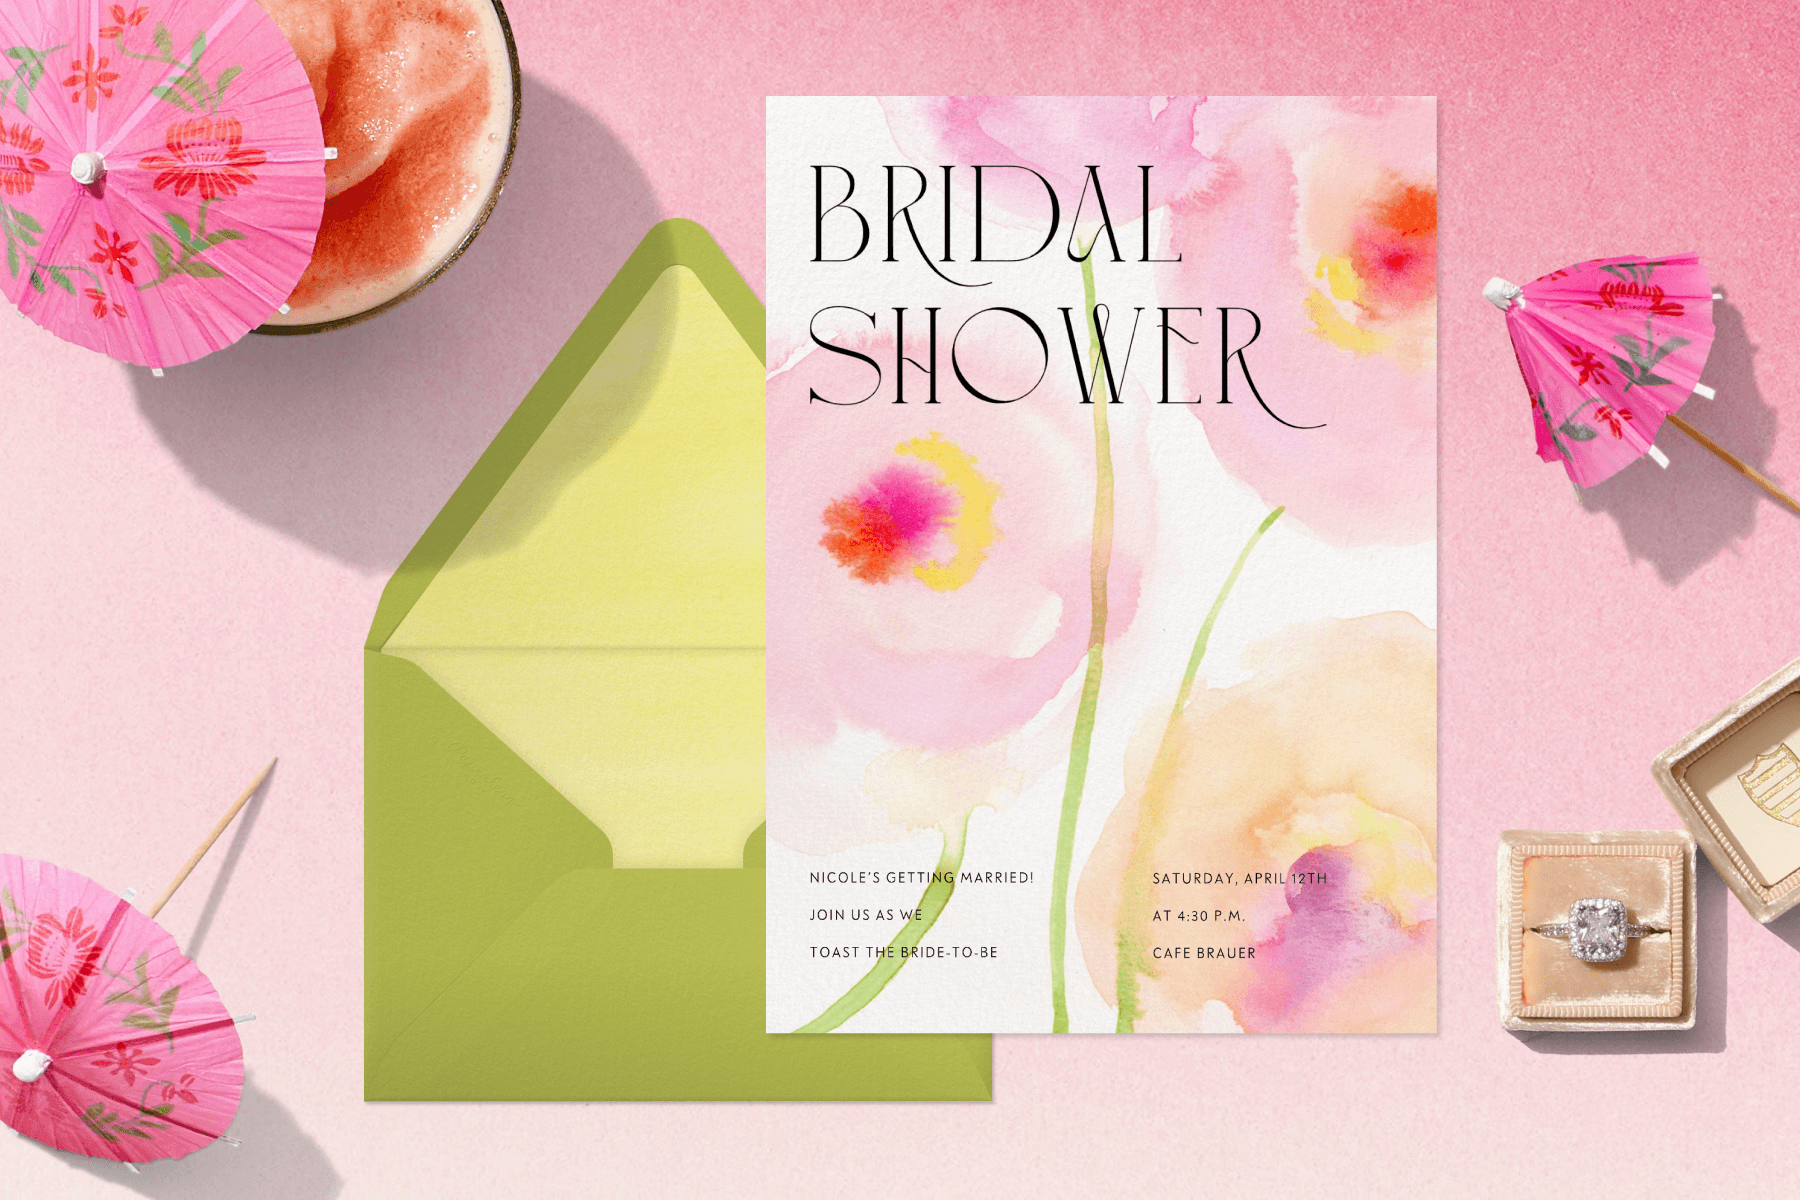 A pink watercolor bridal shower invitation surrounded by drink umbrellas and an engagement ring.